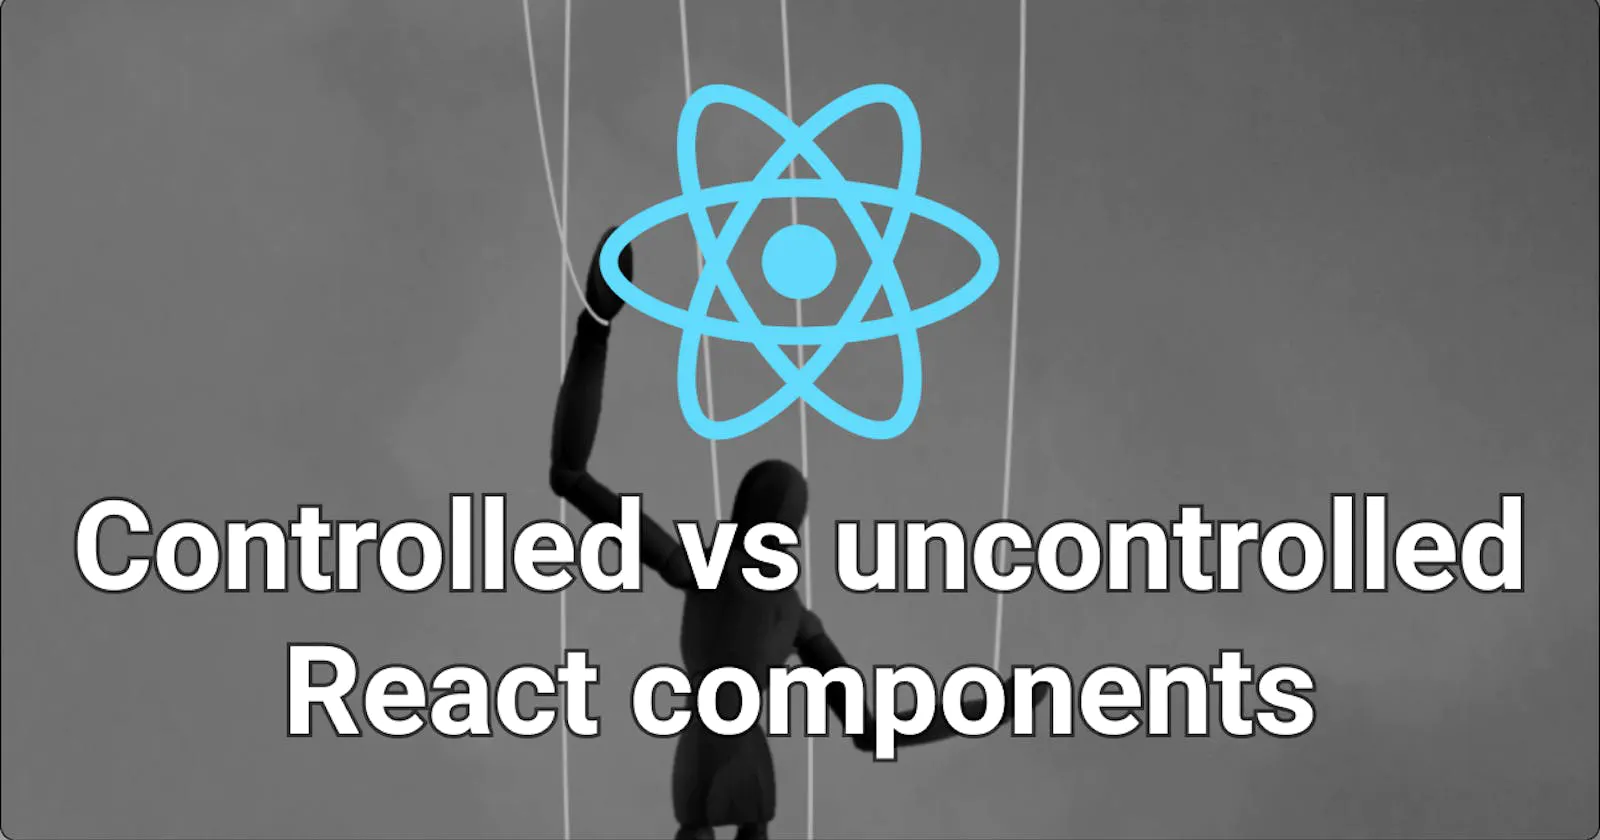 How to build both controlled and uncontrolled React components (with examples)